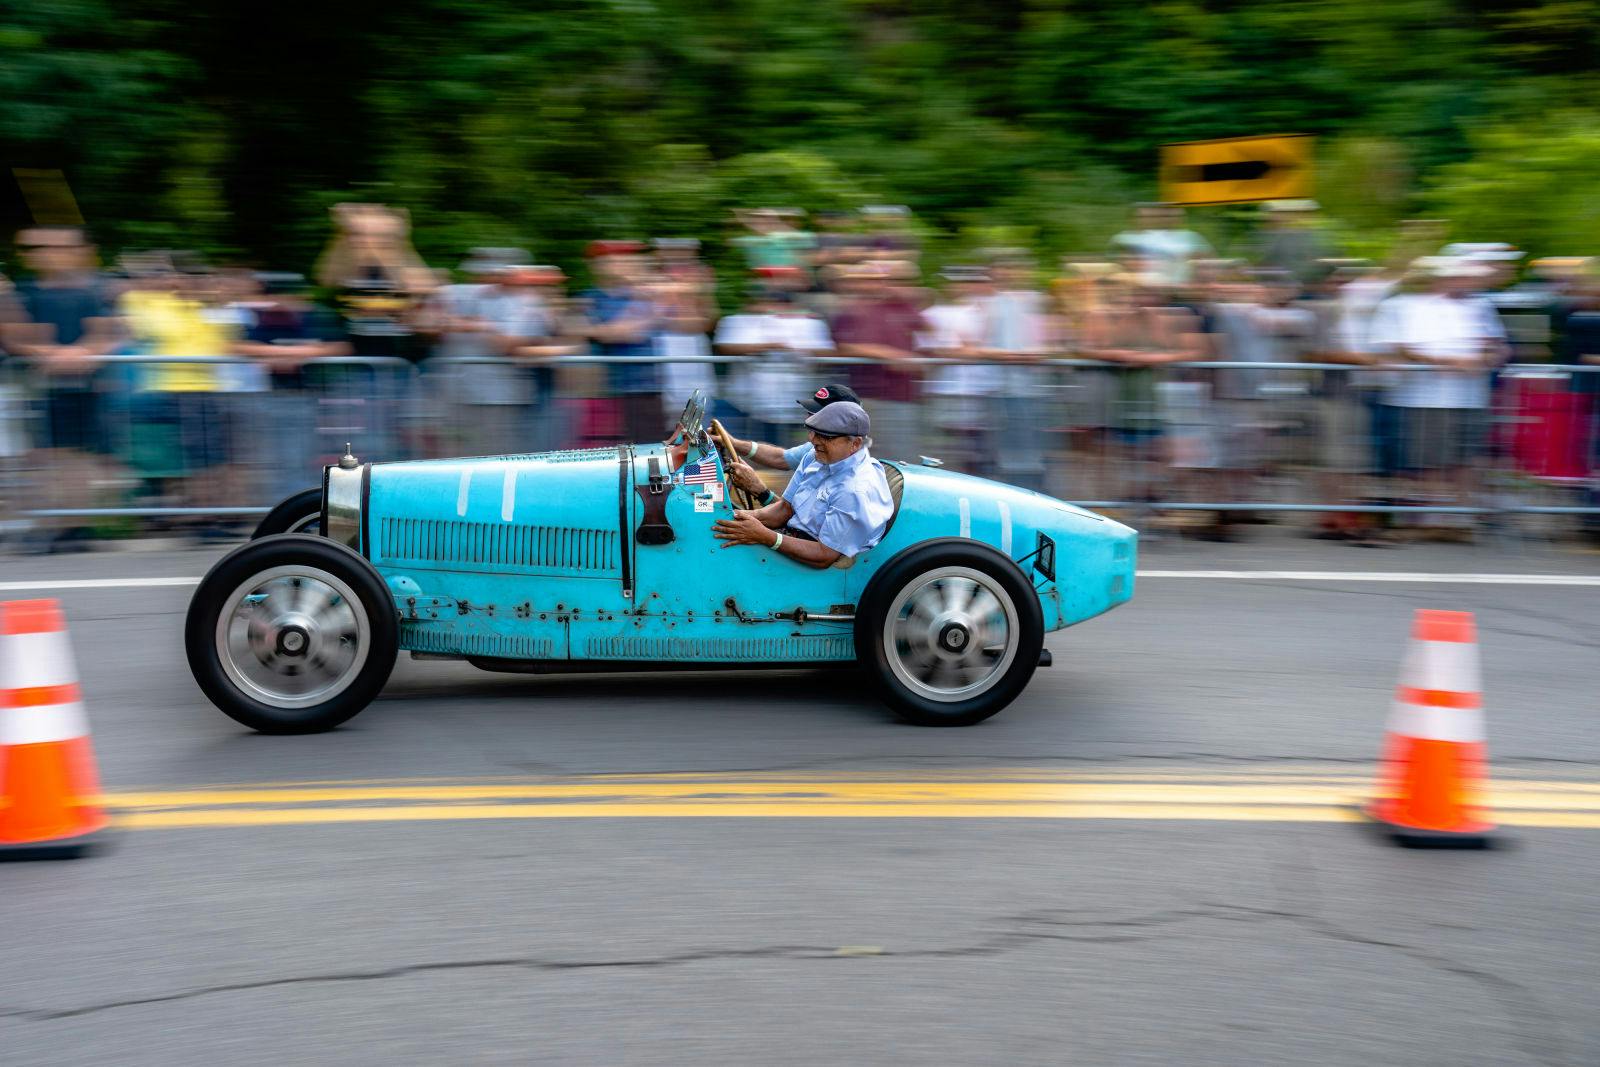 Crowds of enthusiastic spectators came out to cheer on the Bugatti legends at the U.S. Bugatti Grand Prix.